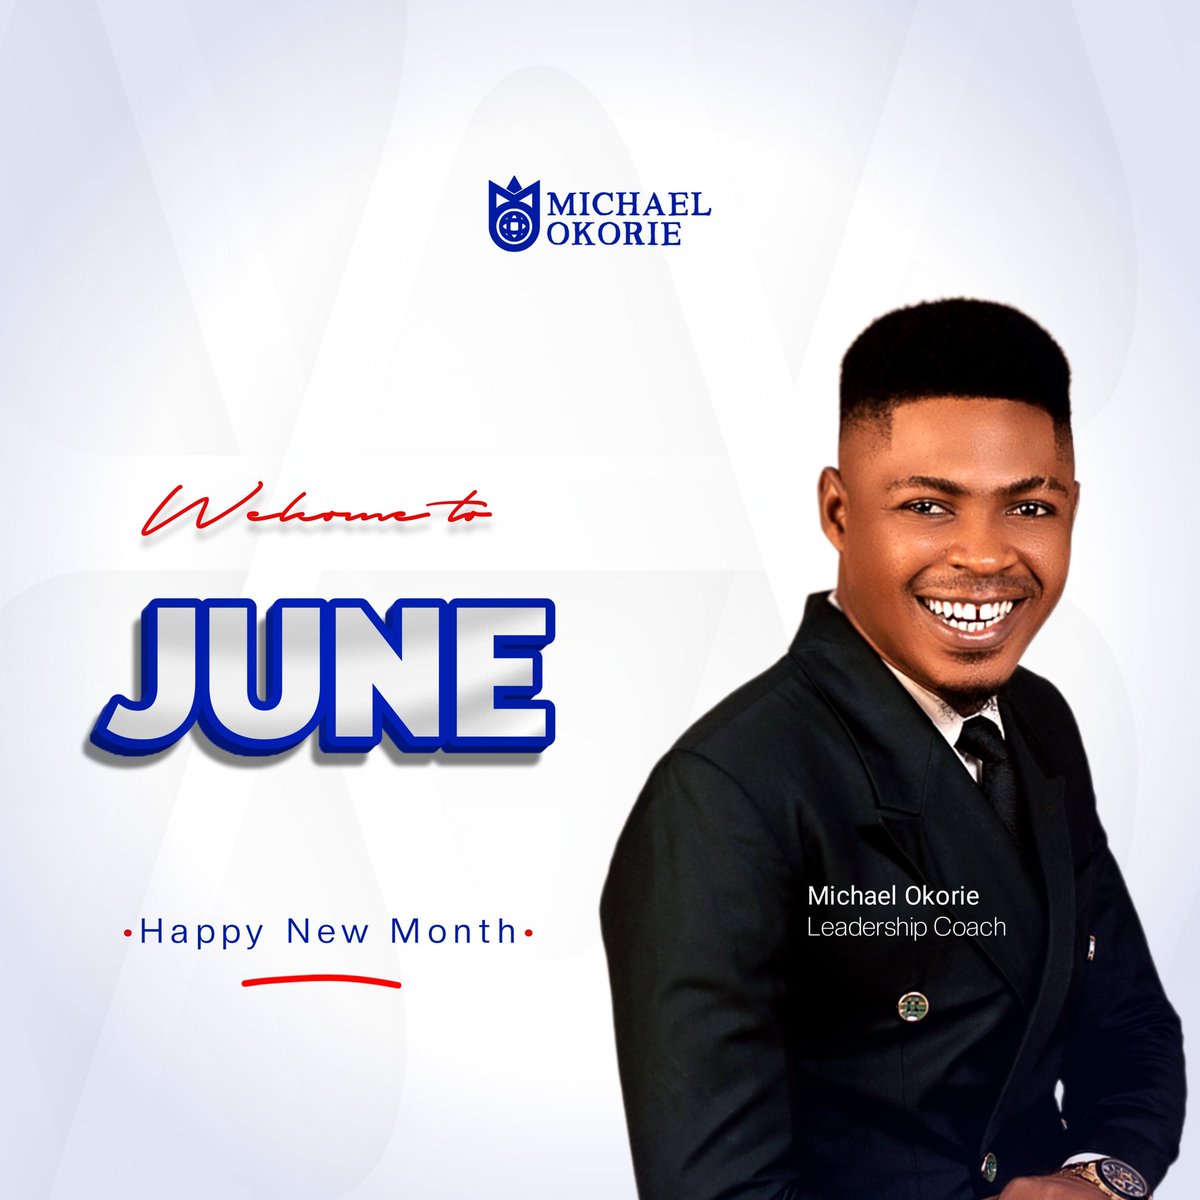 Happy New Month #Family.

This new month, I pray you have the tenacity to push beyond the boundaries of your excuses and limitations.

It will be a great month for you.

Welcome to June!

I'm Rooting For You.

#themichaelokorie #leadership #effectiveness #peakperformance #june